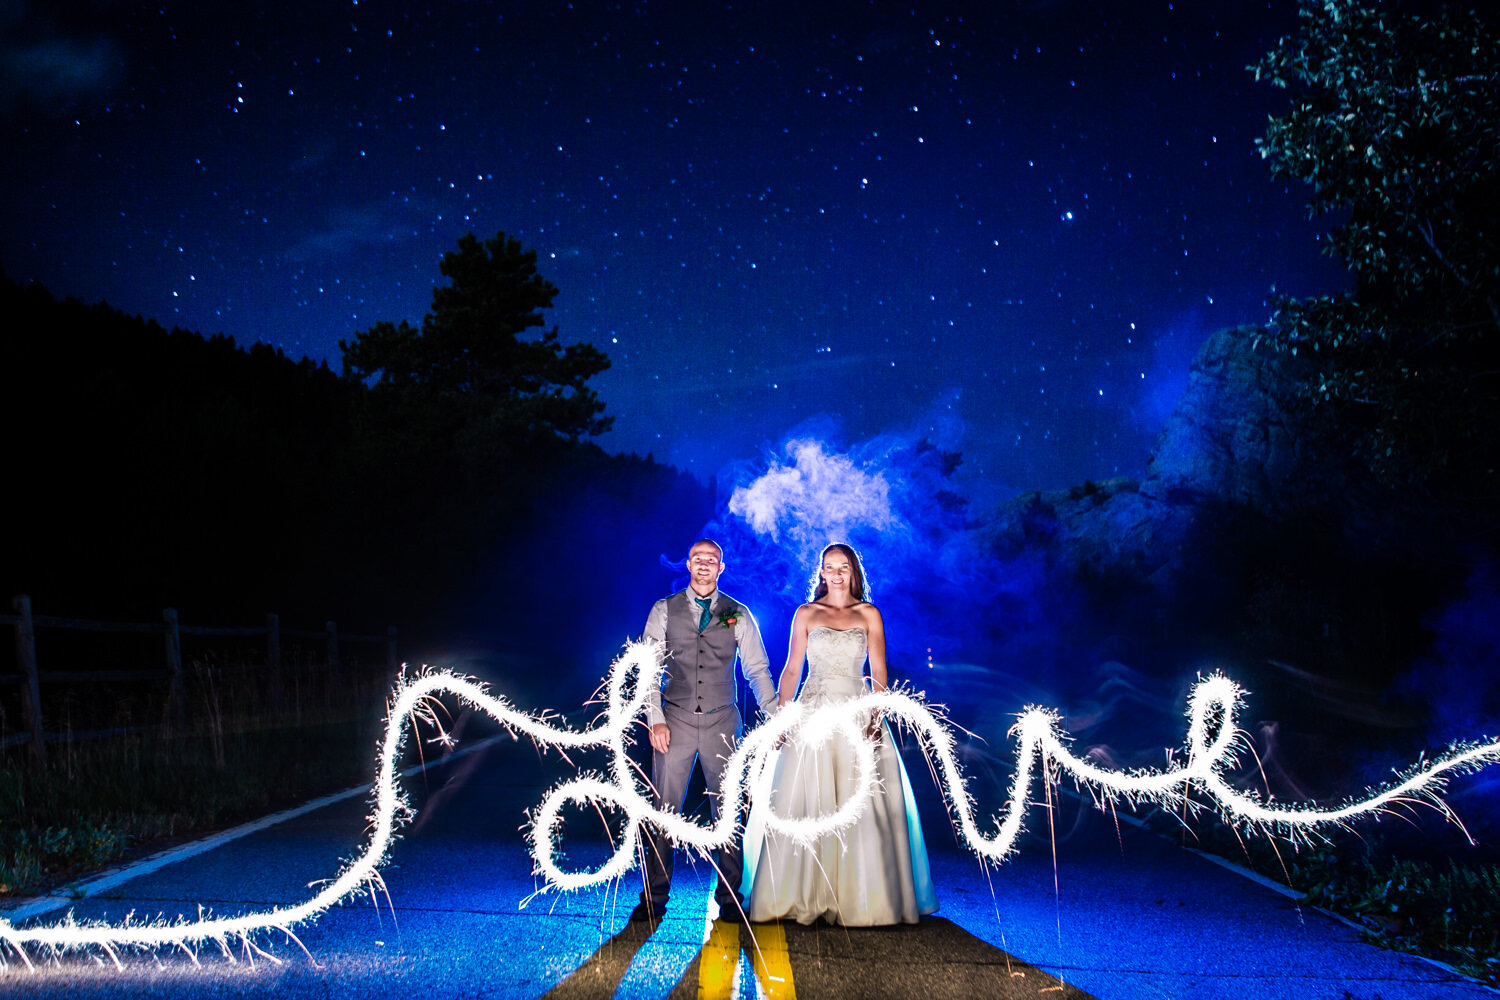  Colorado and Denver best wedding photographer, capturing vibrant bold, colorful, artistic, ourdoor wedding for fun couple who love photography. 